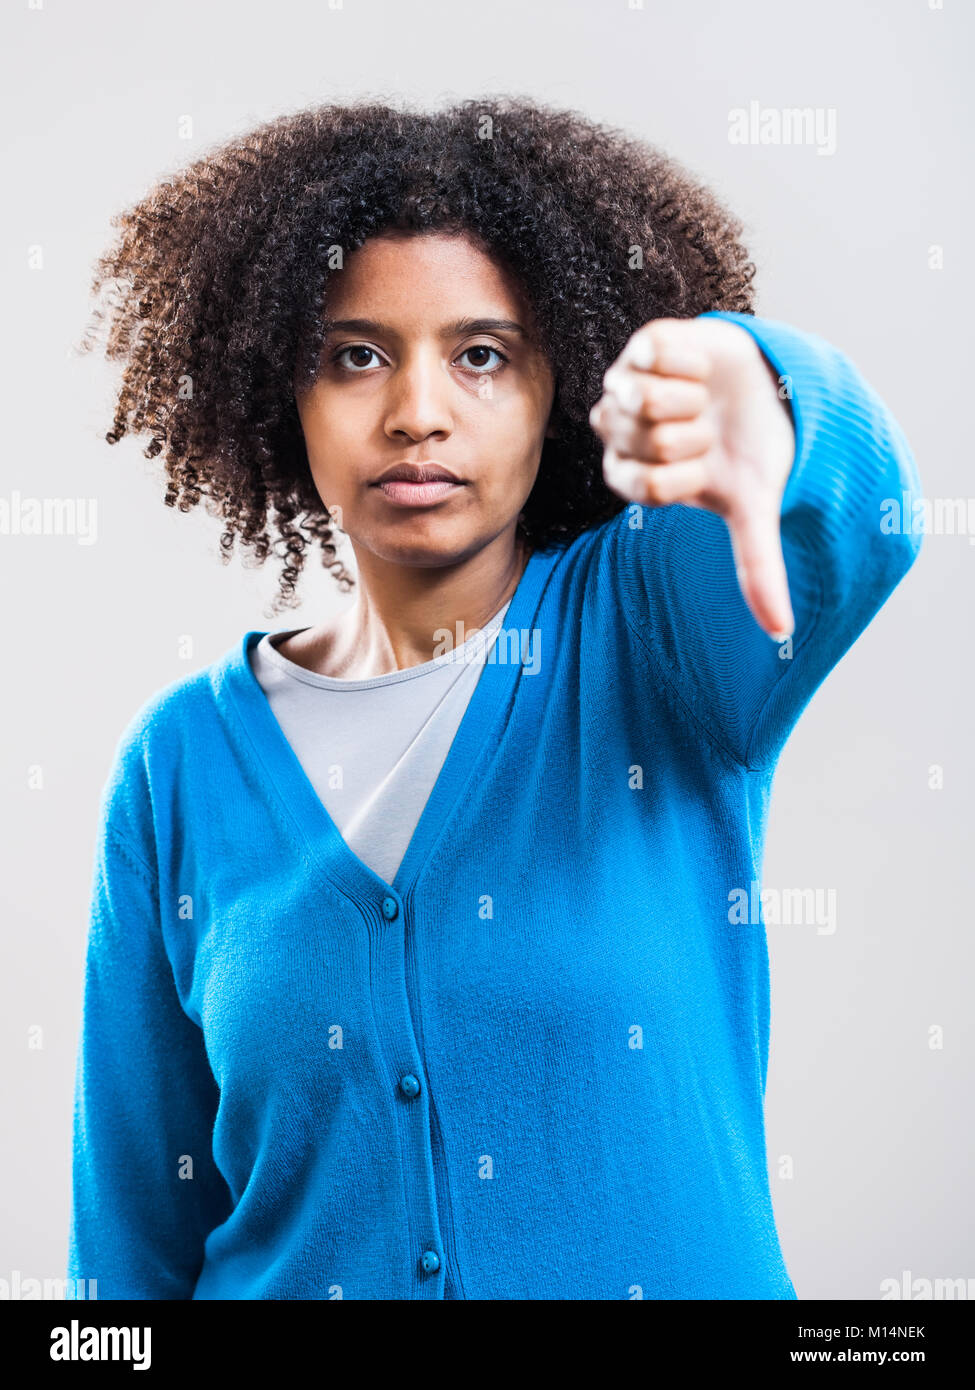 Portrait of angry woman Stock Photo